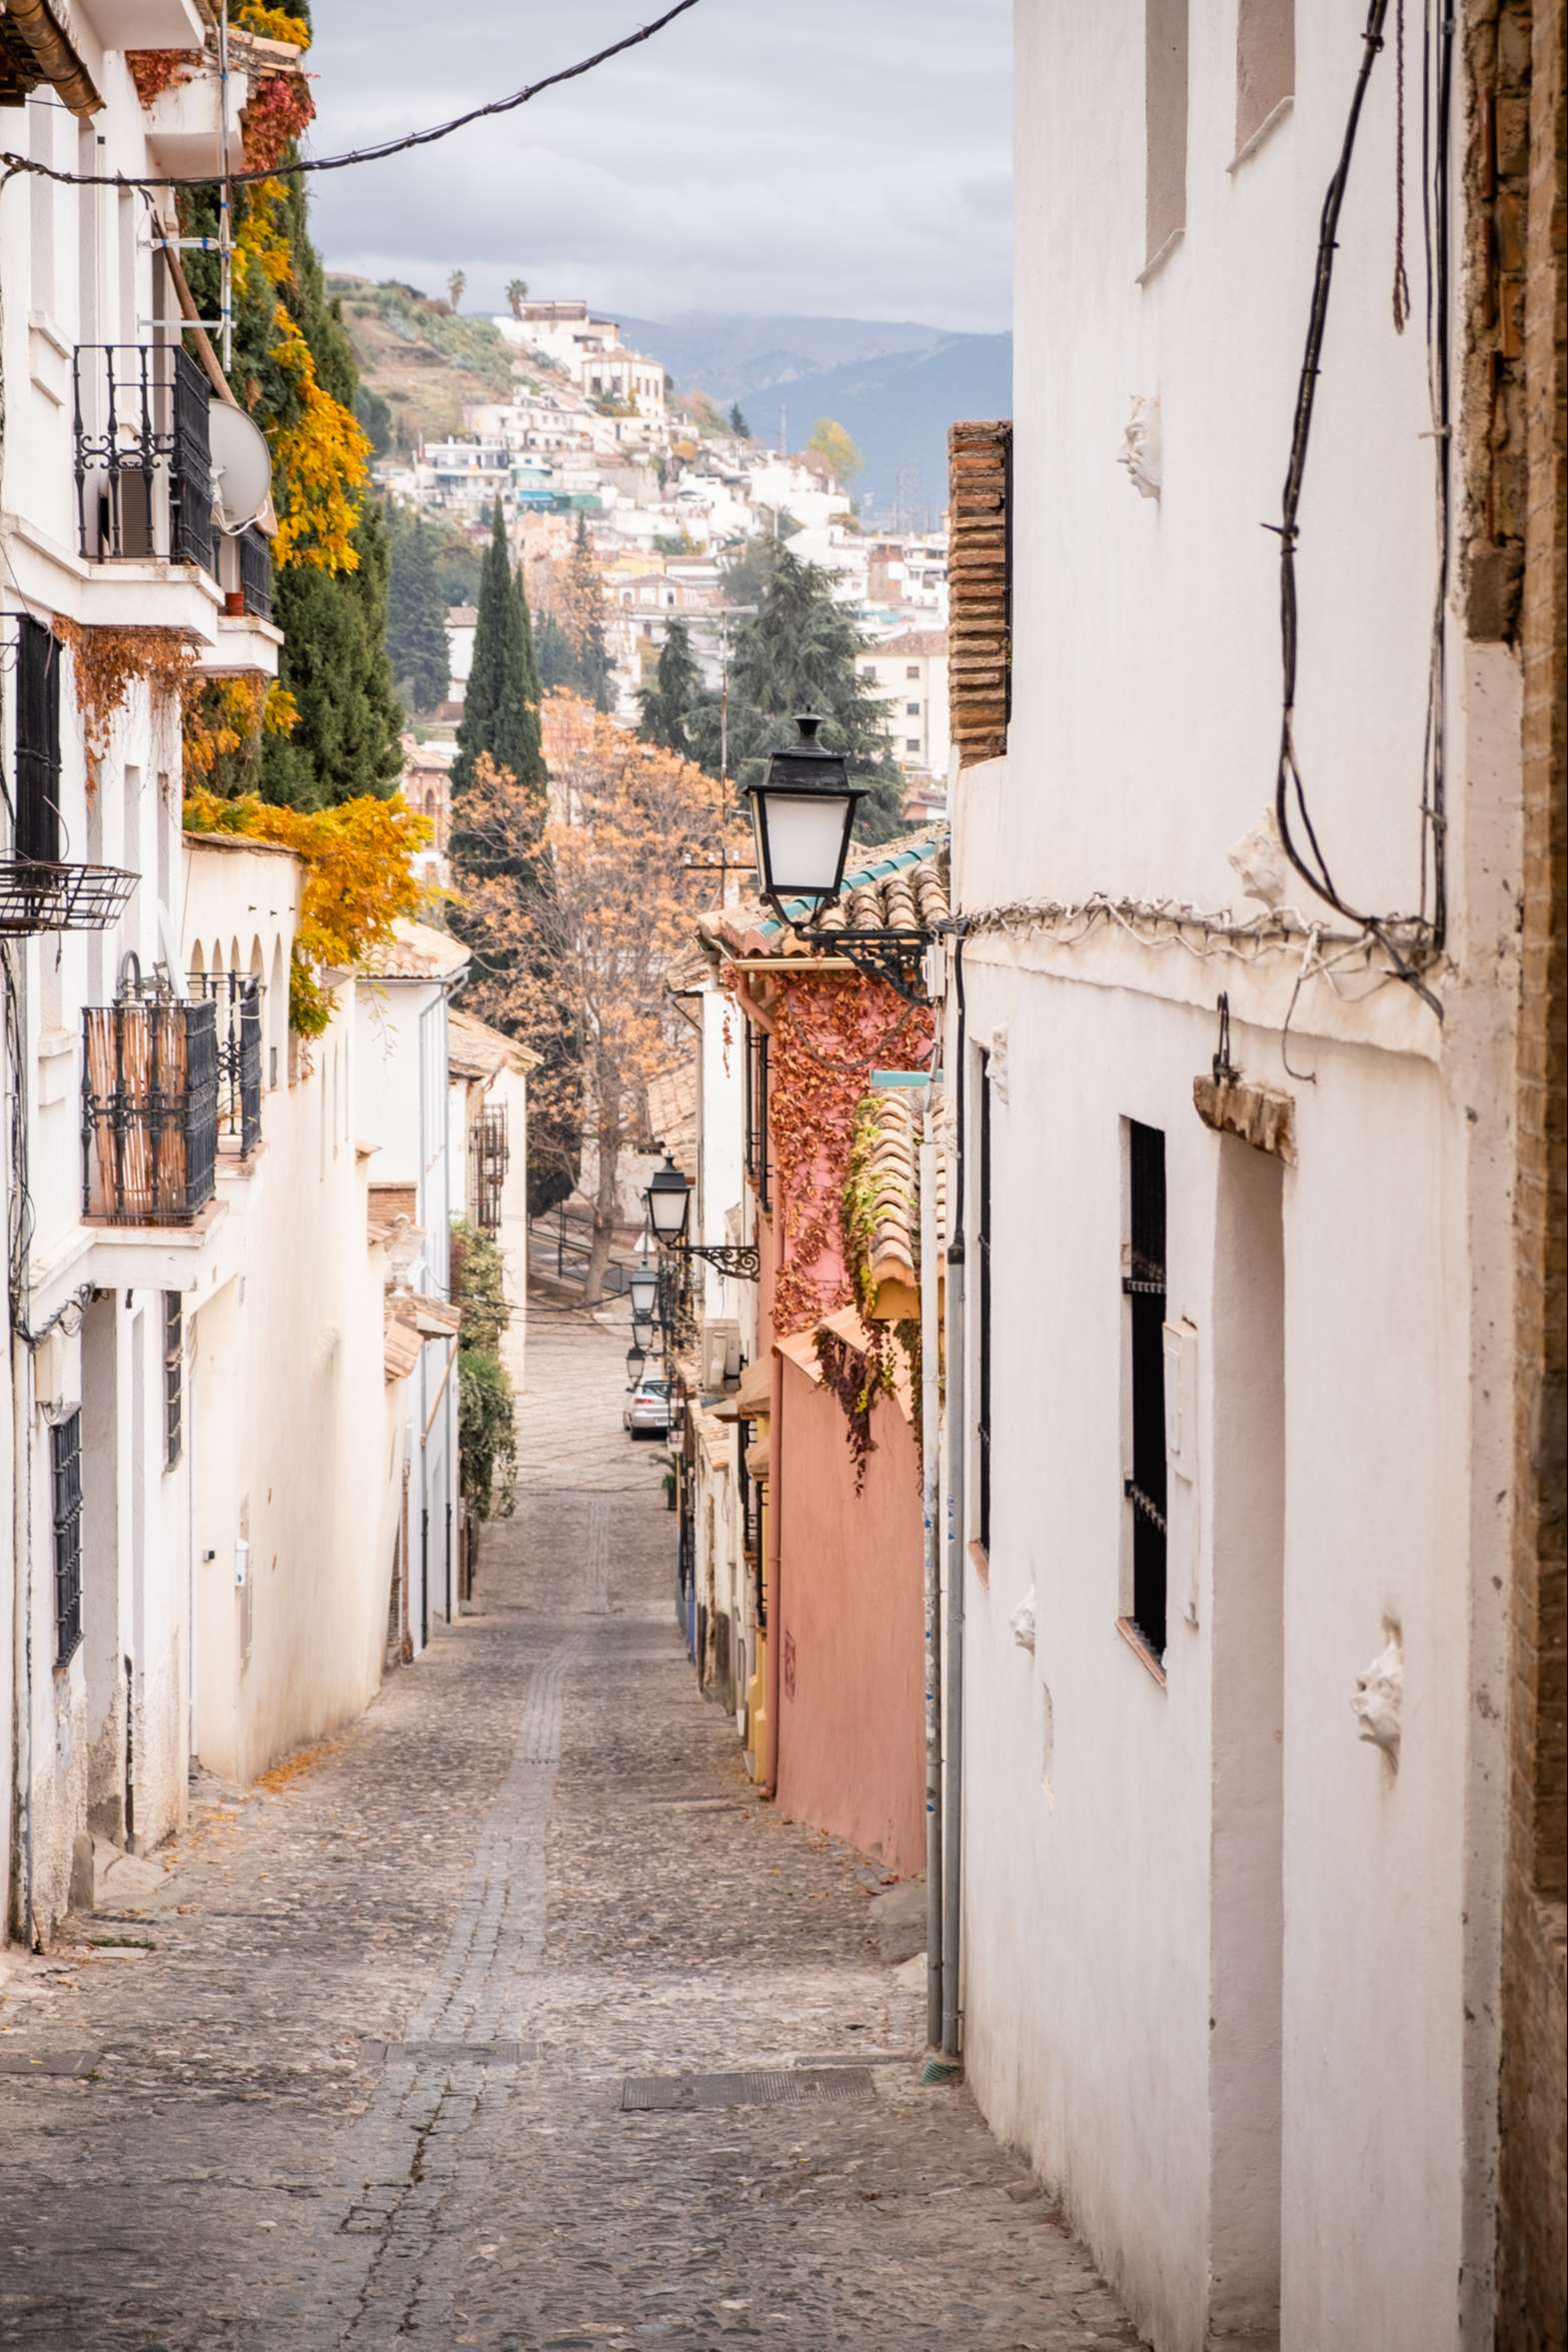 Romantic cobbled street in Granada leading to hilly suburbs